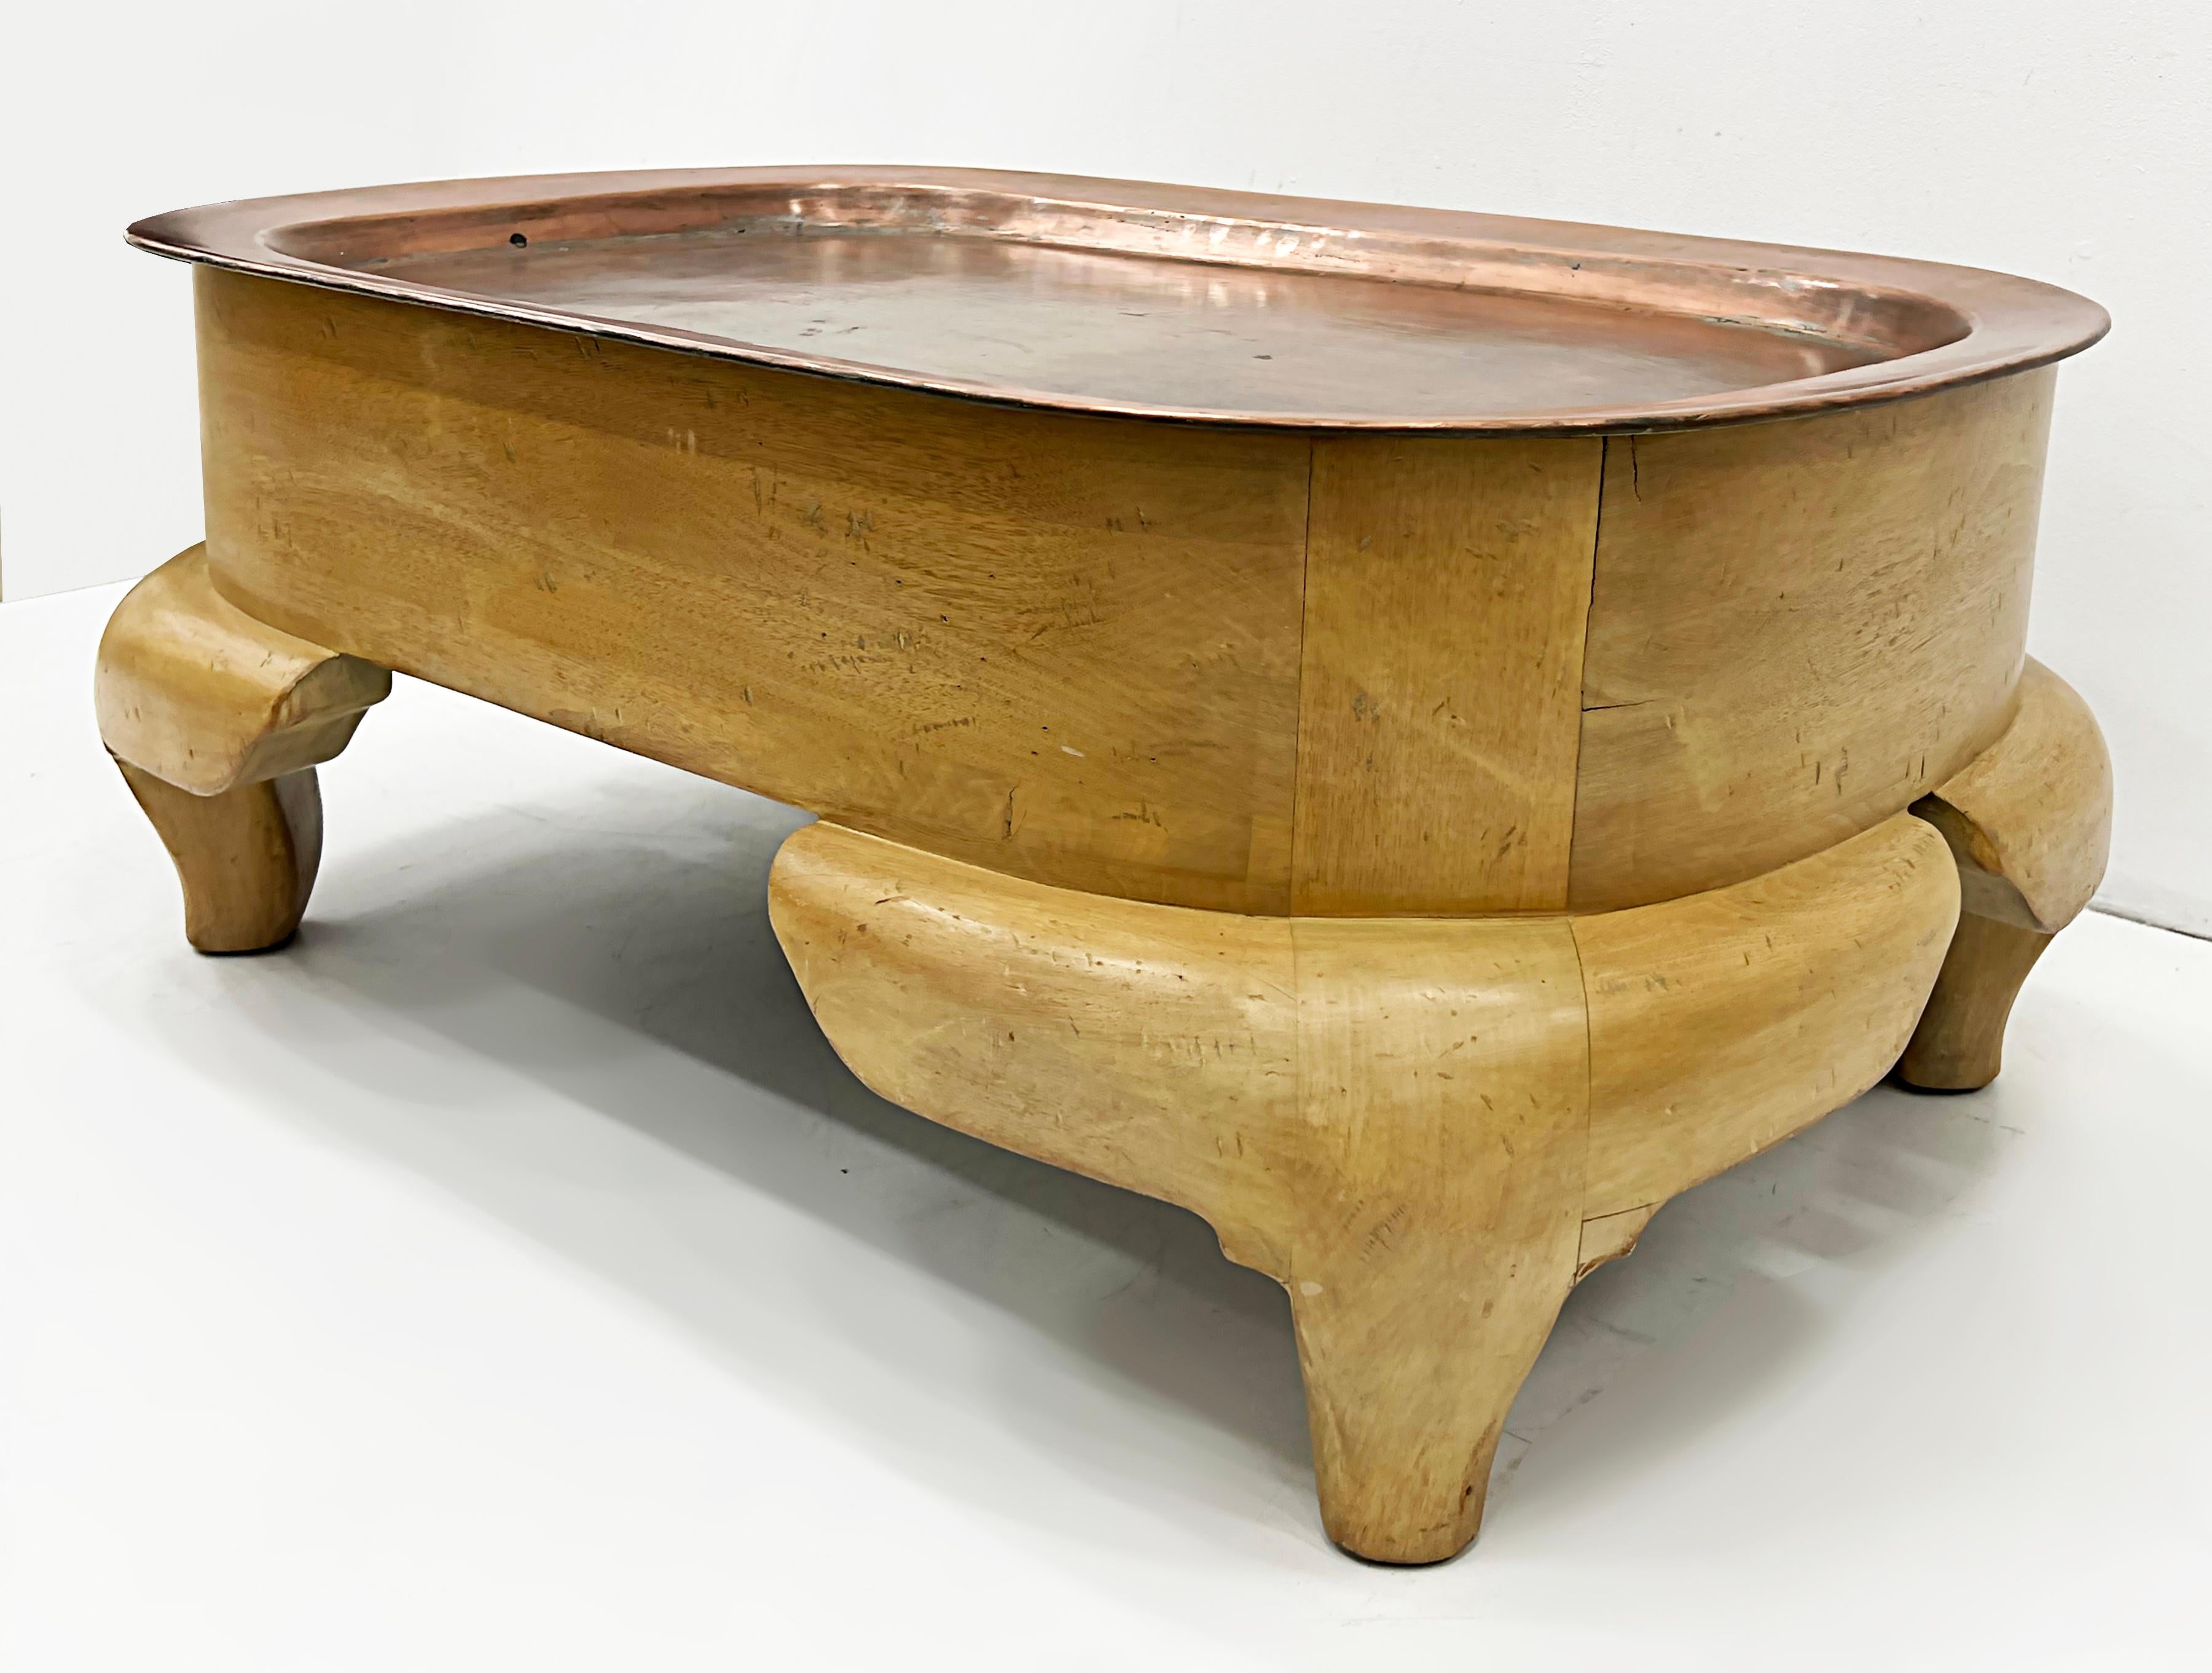 Rare Postmodern wood coffee table with a copper tray top

Offered for sale is a very rare and unusual blonde Postmodern wood coffee table with a large and substantial copper tray top. This stylized table is in vintage condition with a rich-aged